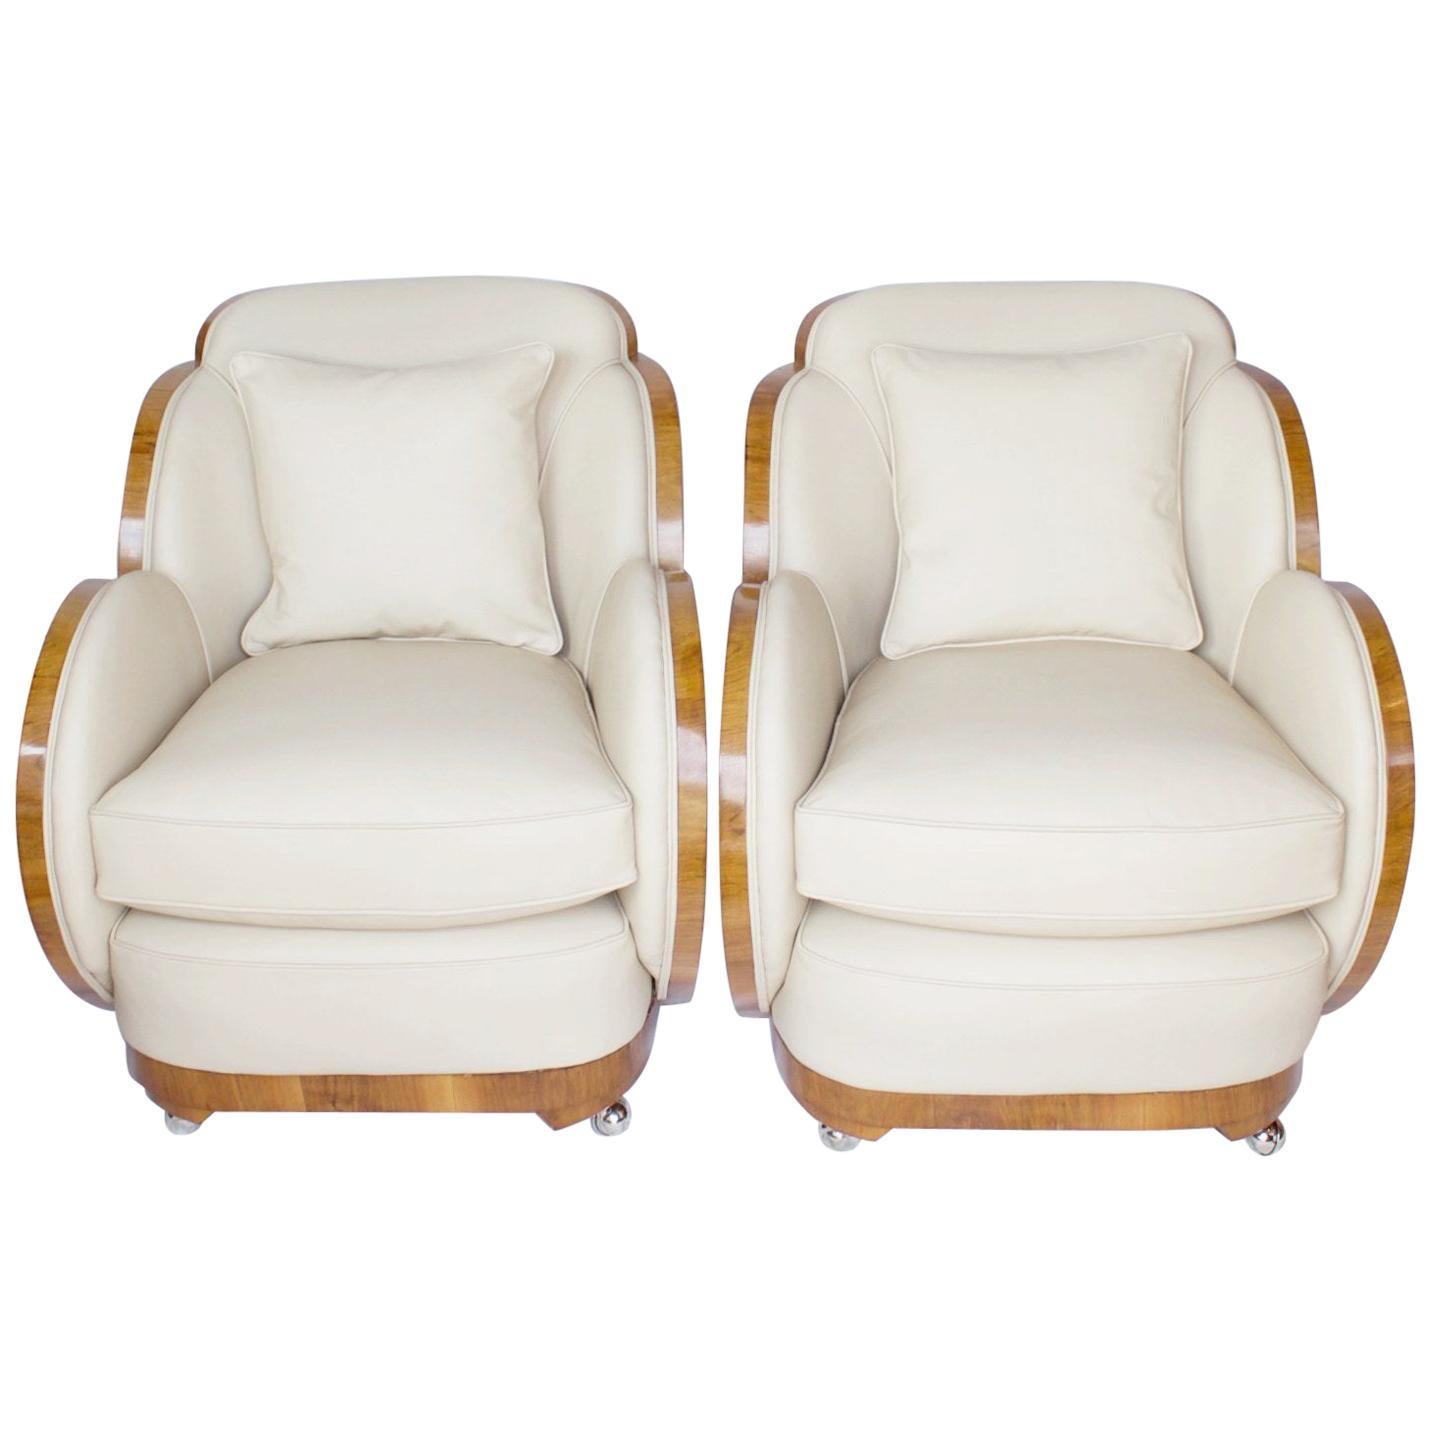 Pair of Art Deco Cloud Back Chairs by Harry & Lou Epstein English, circa 1930